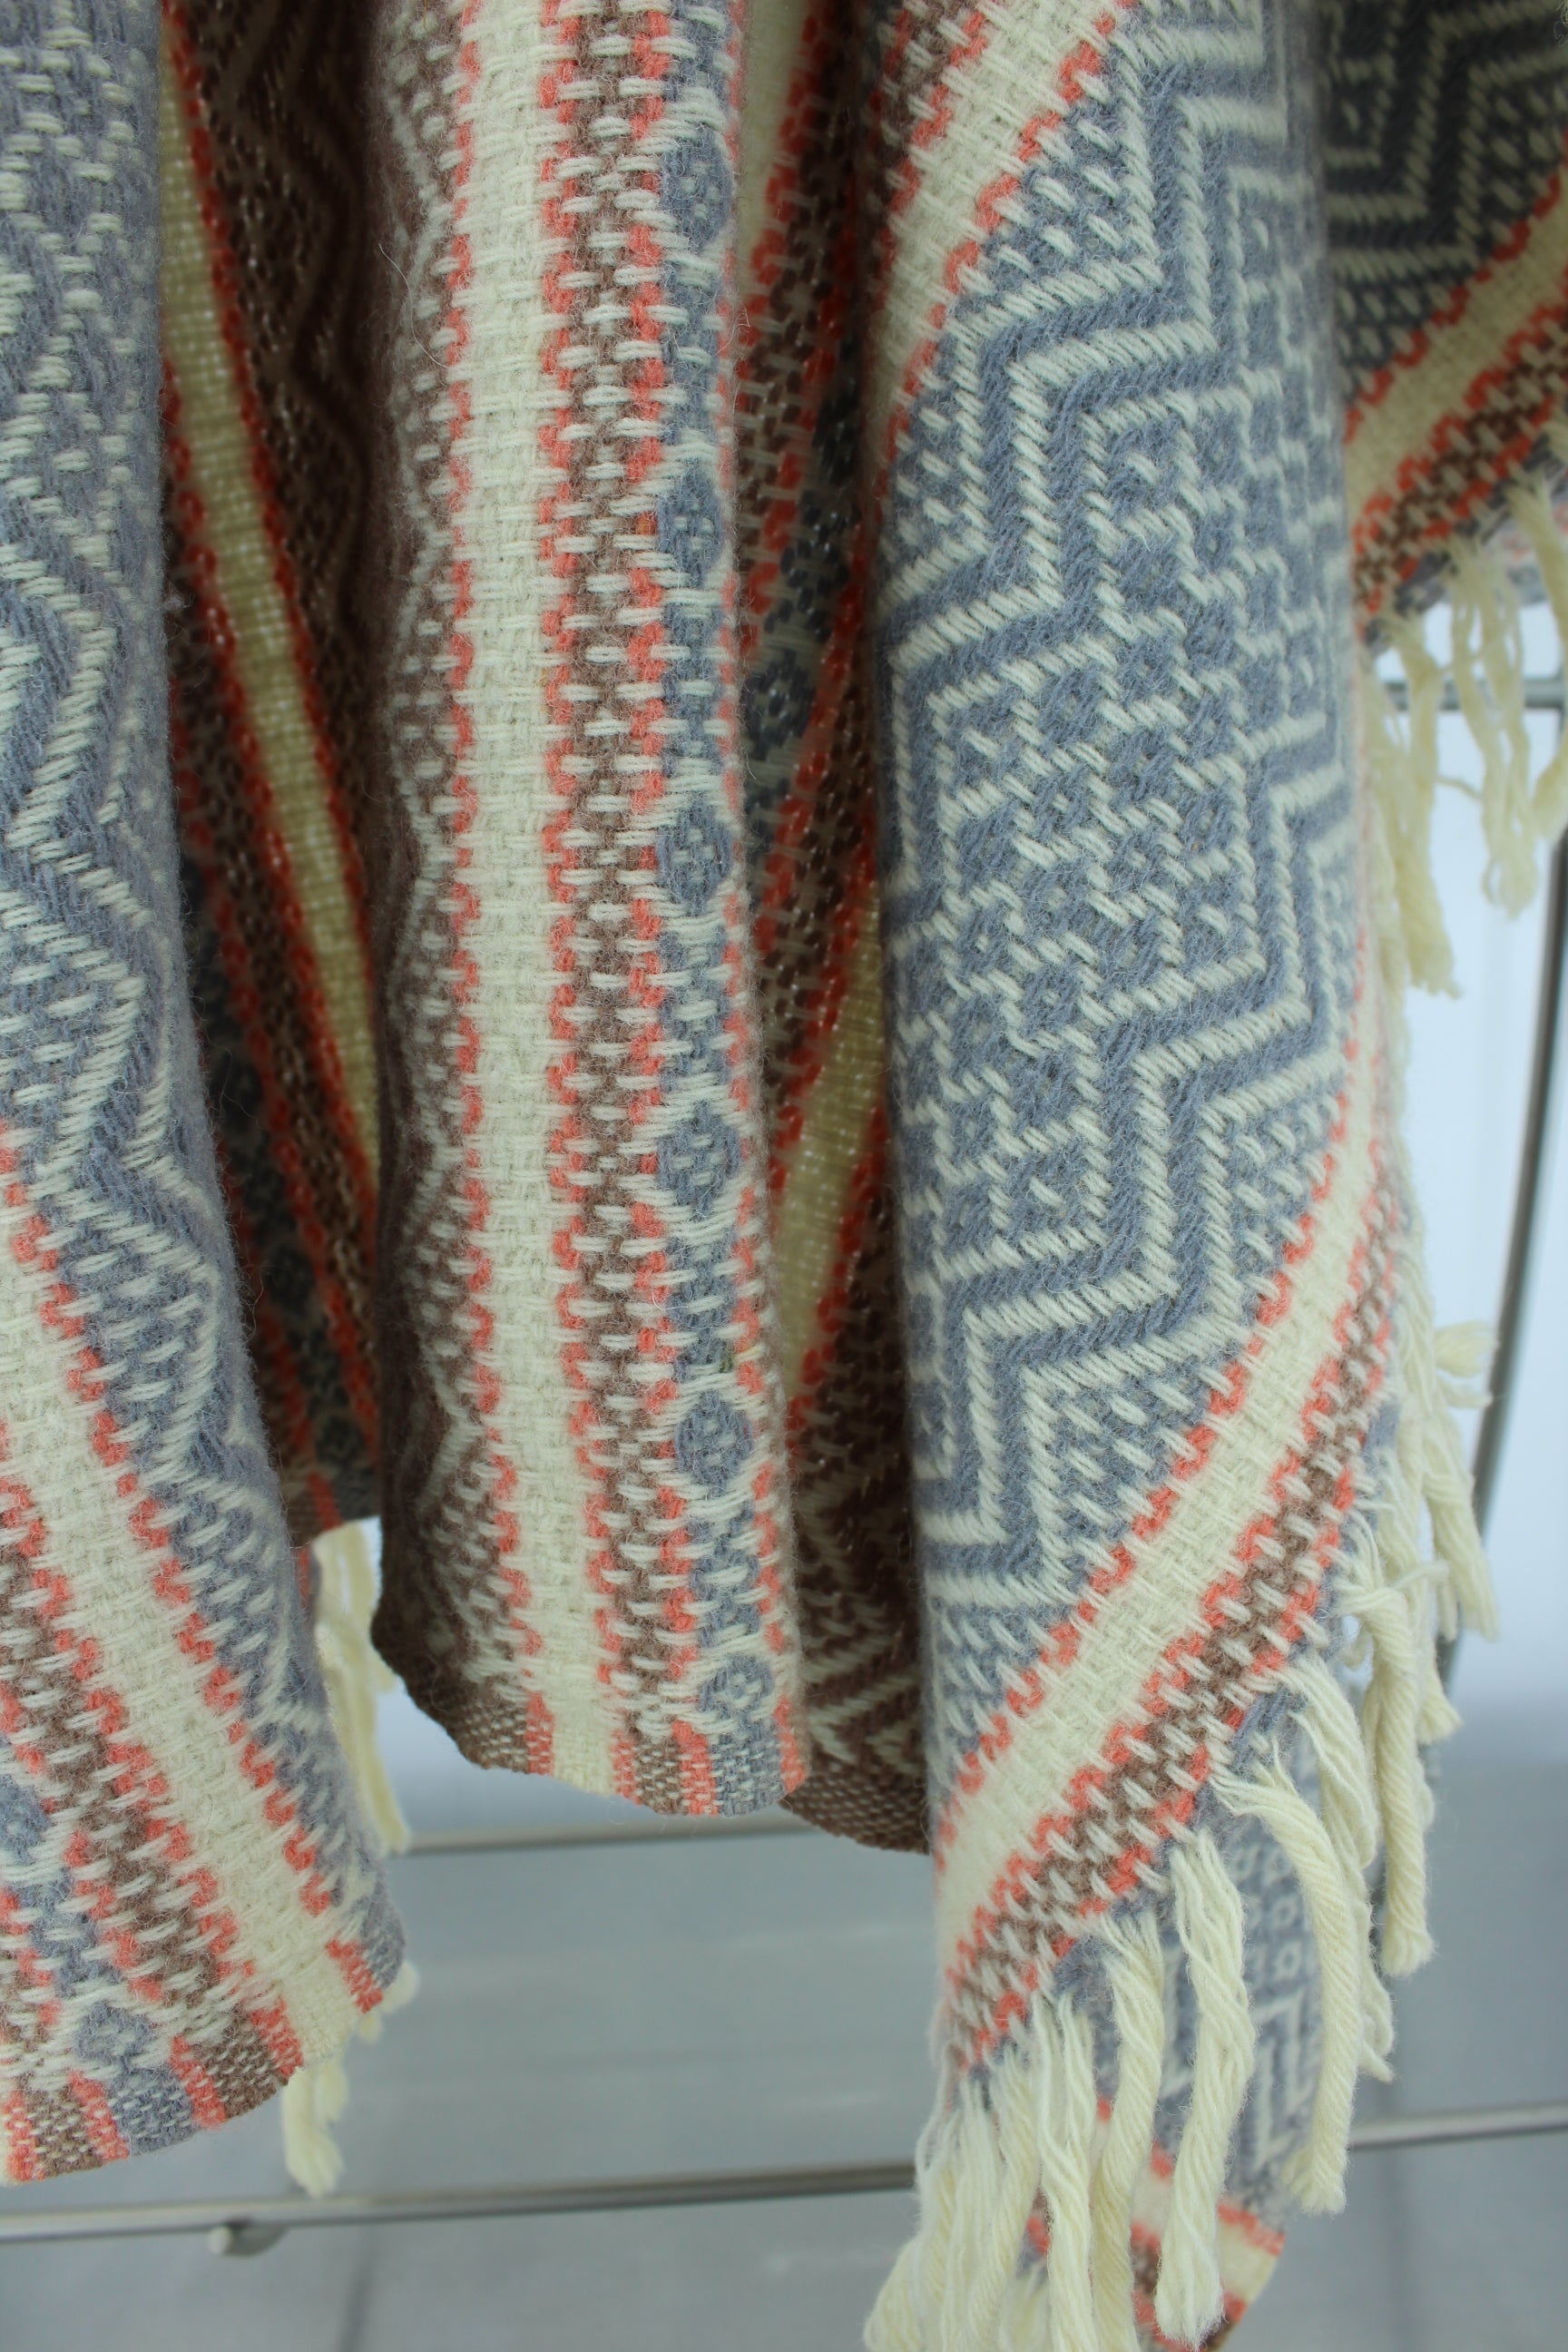 faribo Wool Throw - Southwest Linear Design Ivory Coral Blue - 44" X 43" lovely desert colors